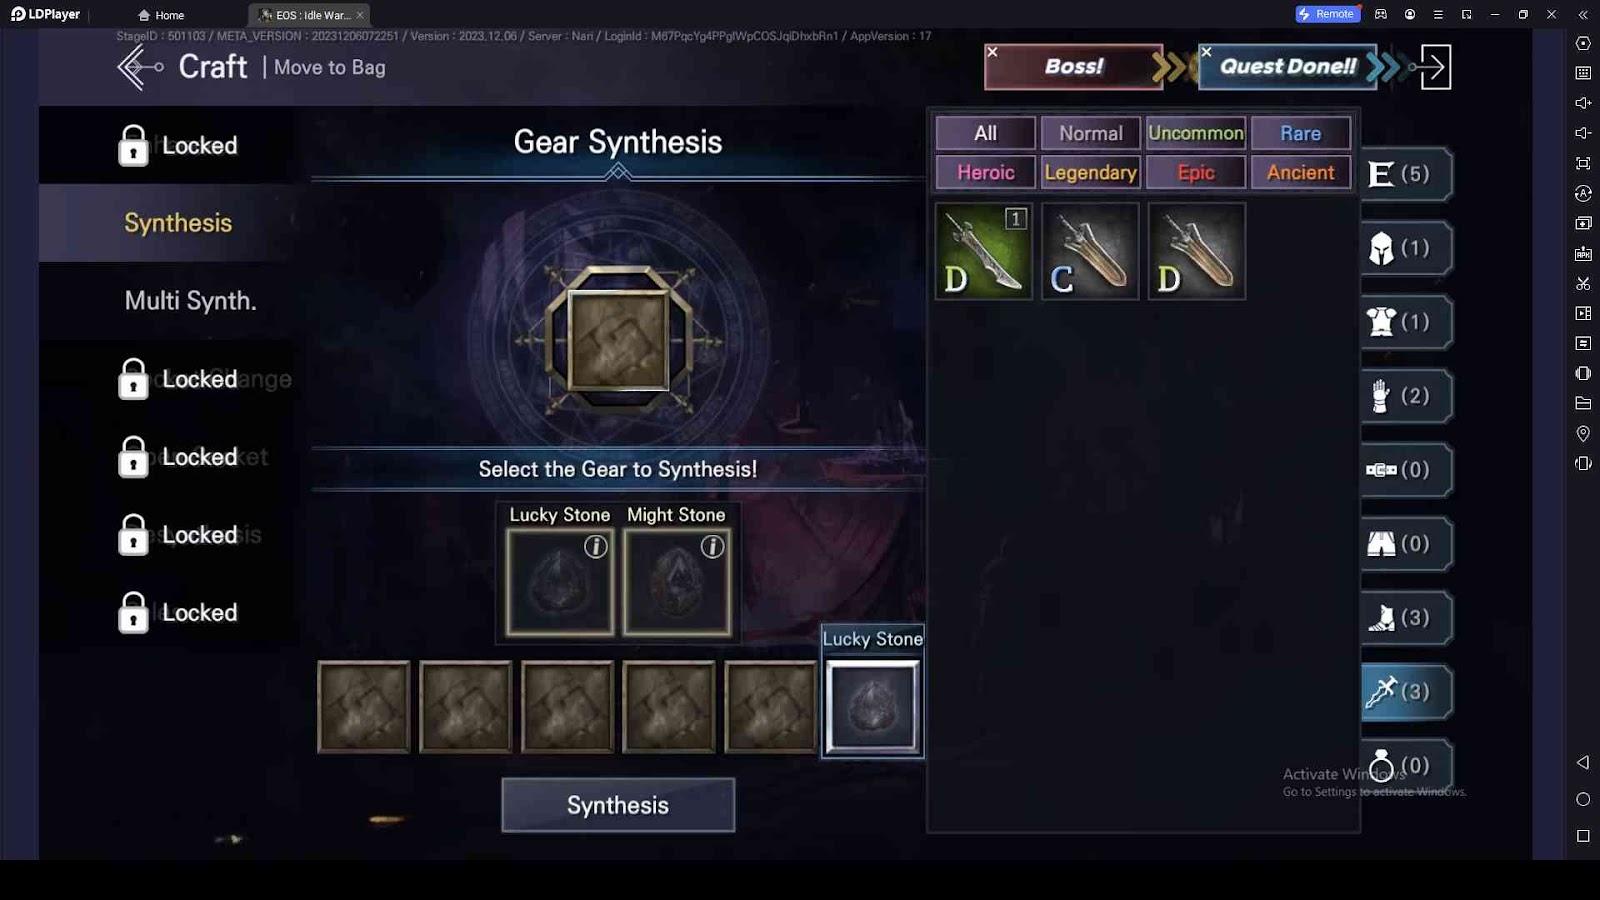 Gear Synthesis to Equip the Best Gear